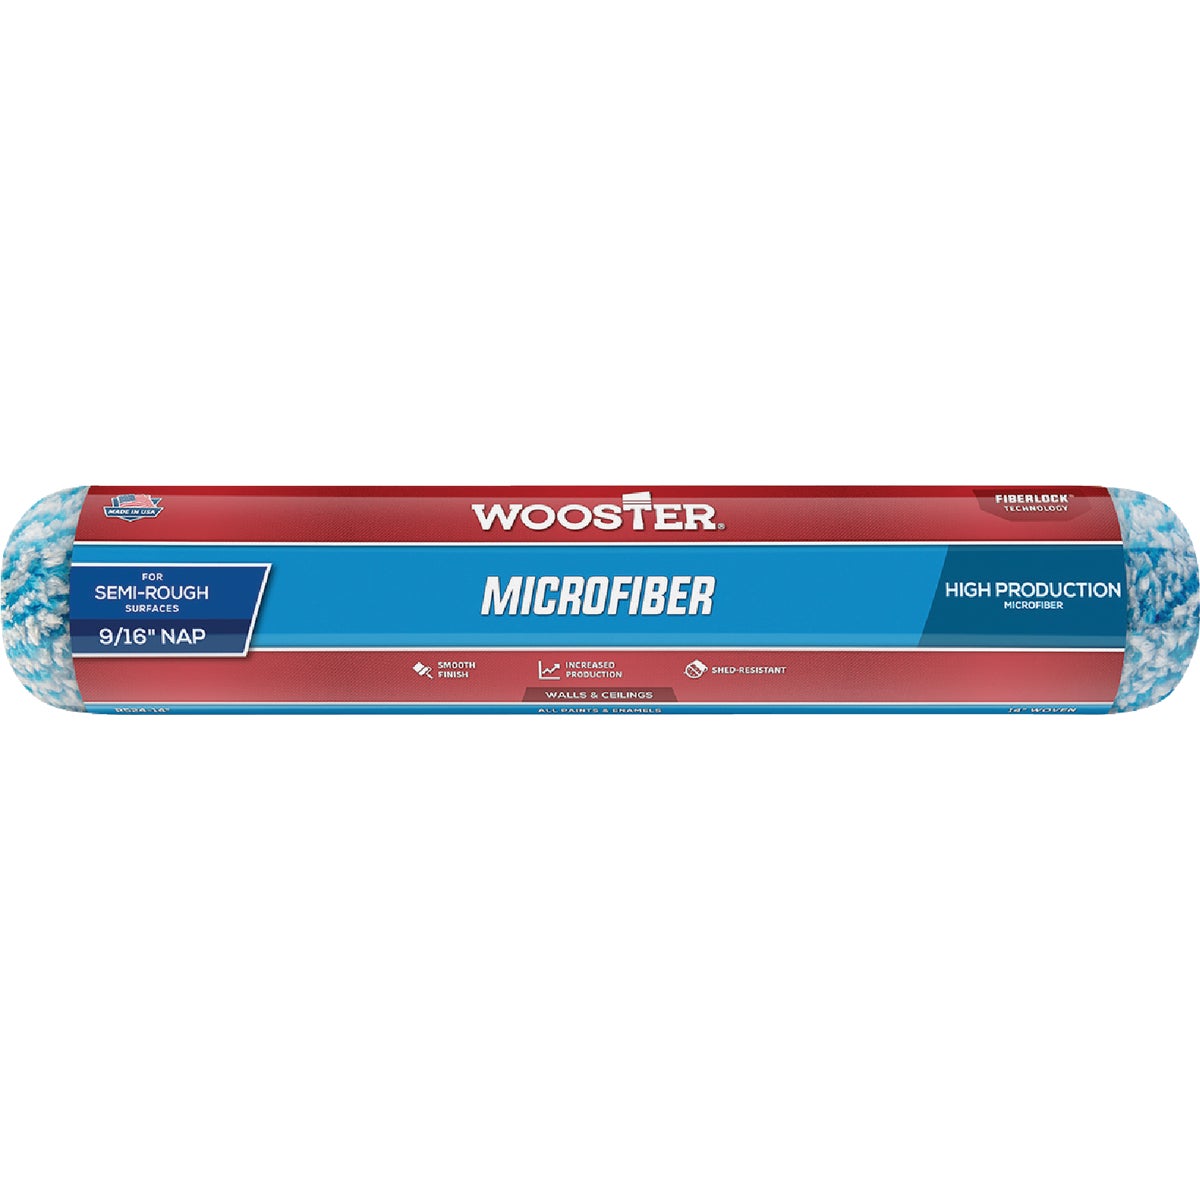 Wooster 14 In. x 9/16 In. Microfiber Roller Cover